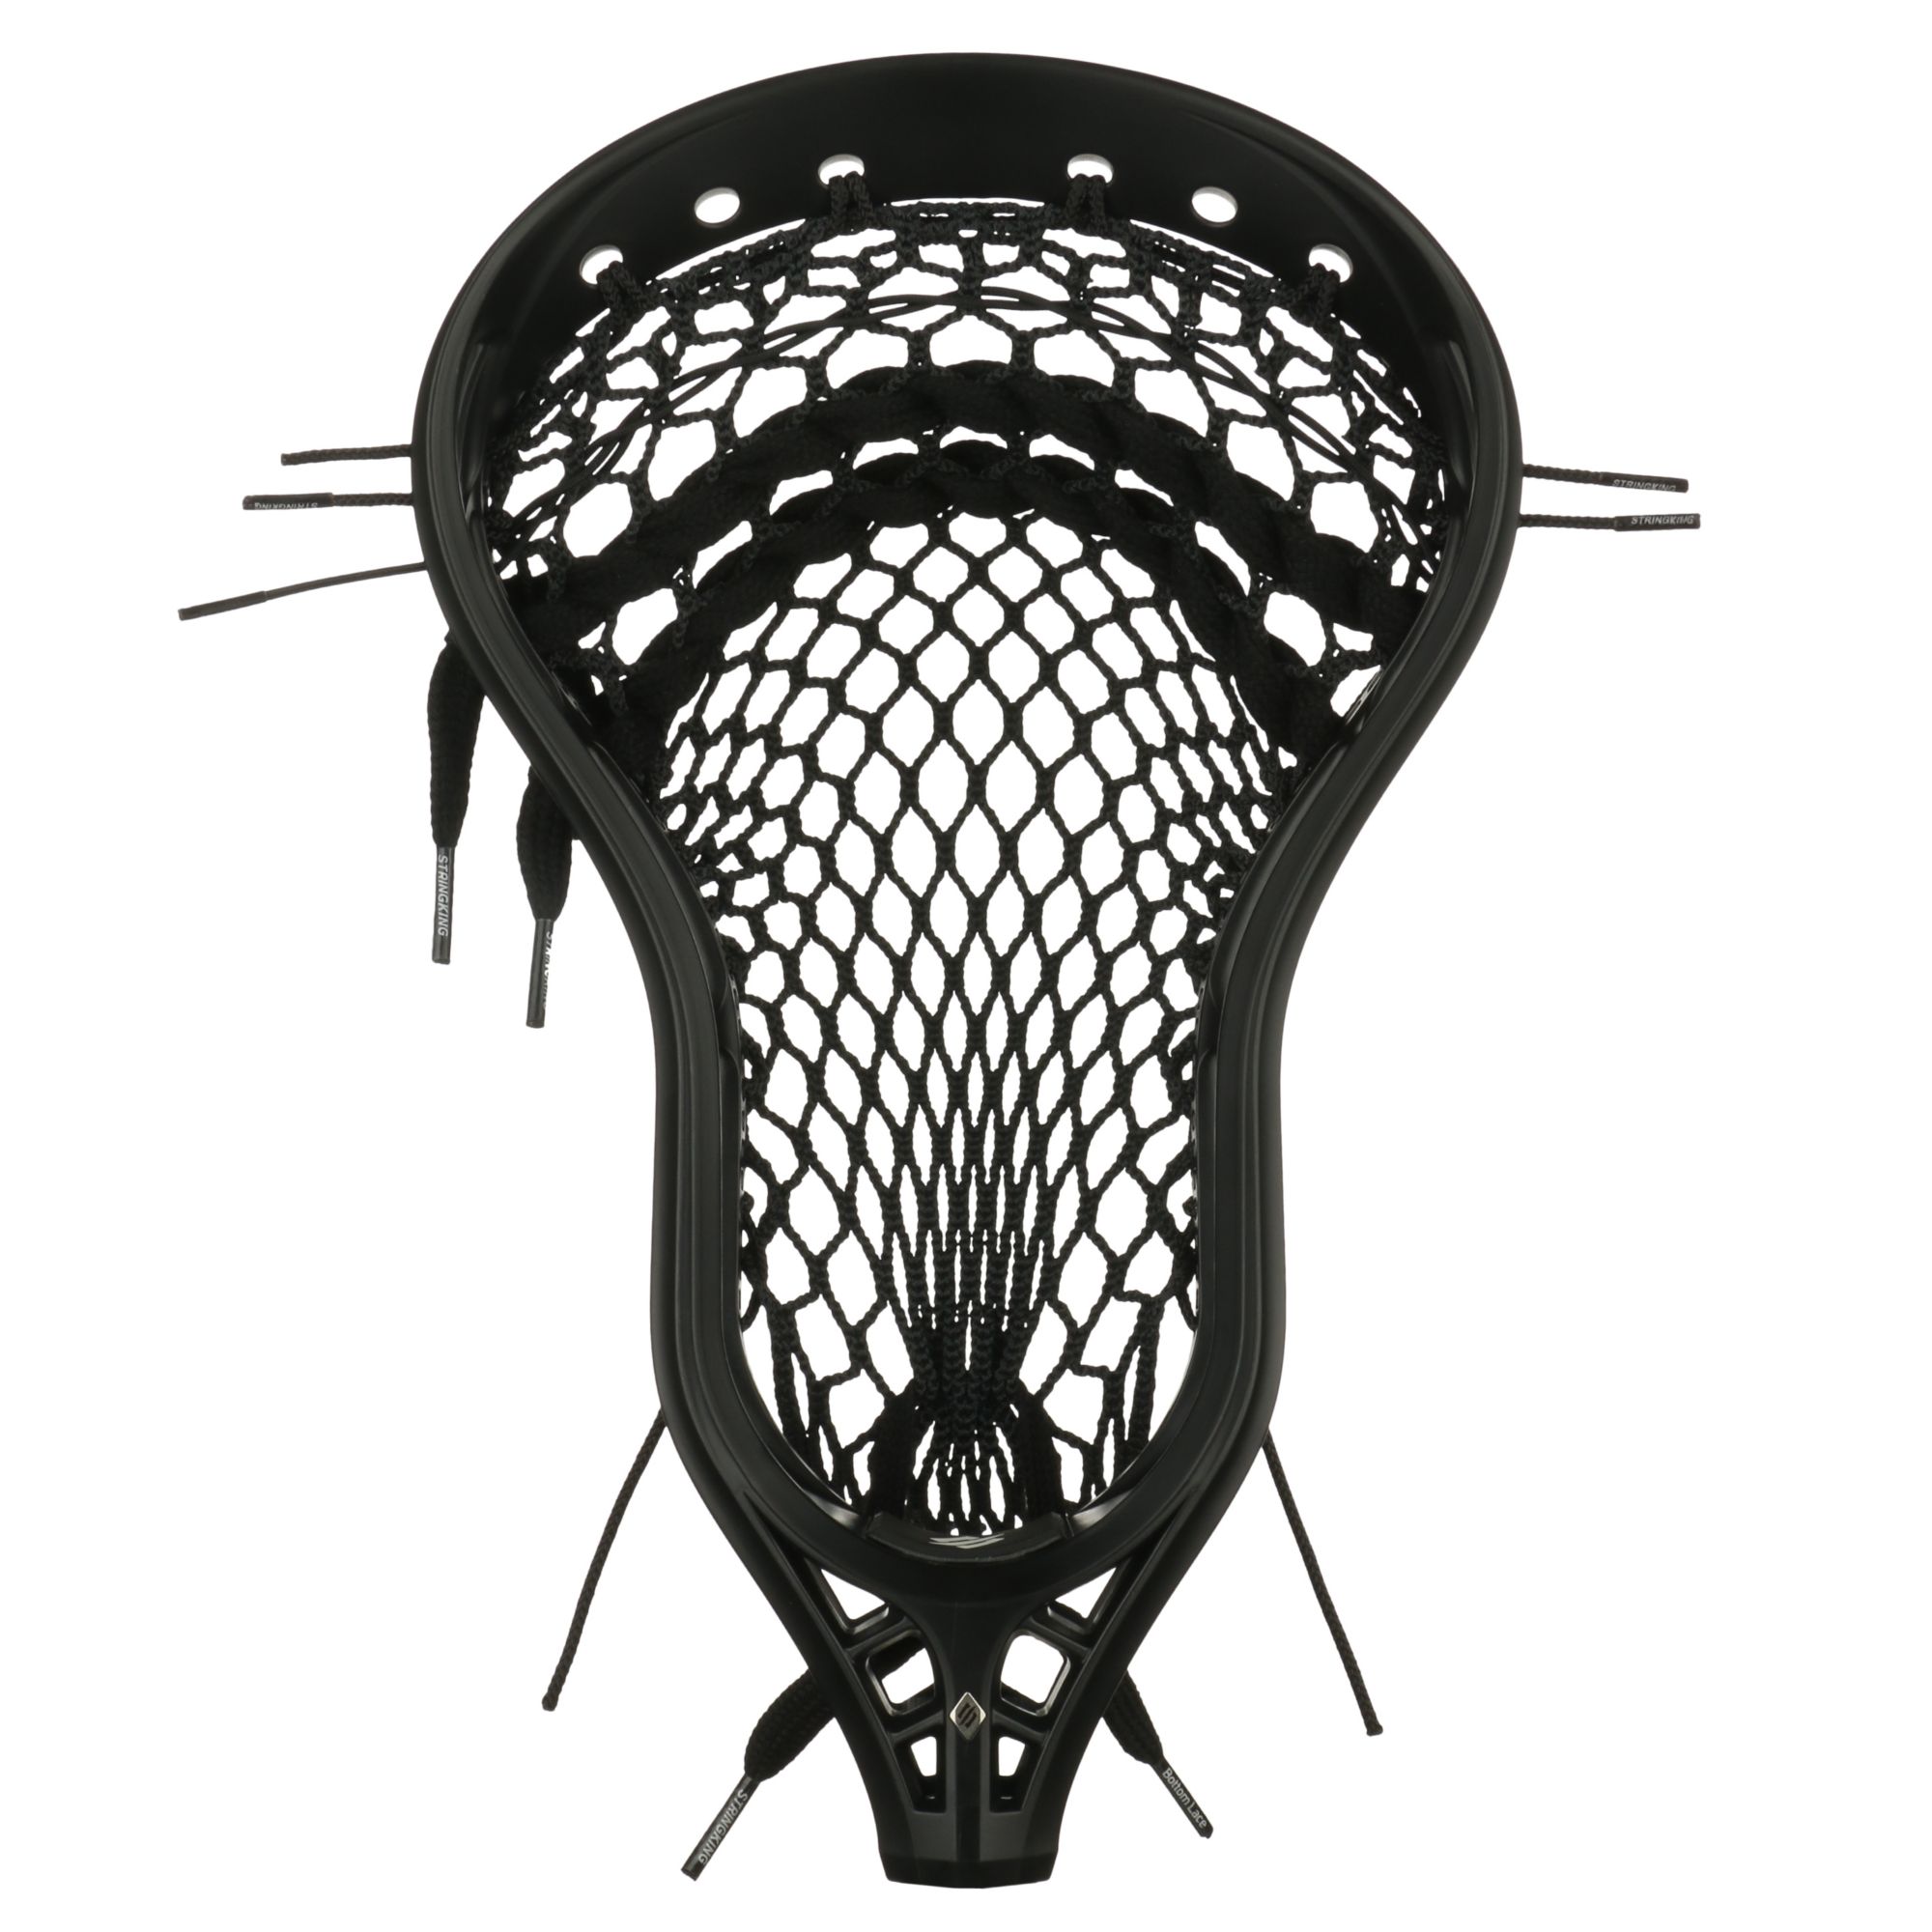 StringKing Mark 2D Lacrosse Head with 5S Mesh